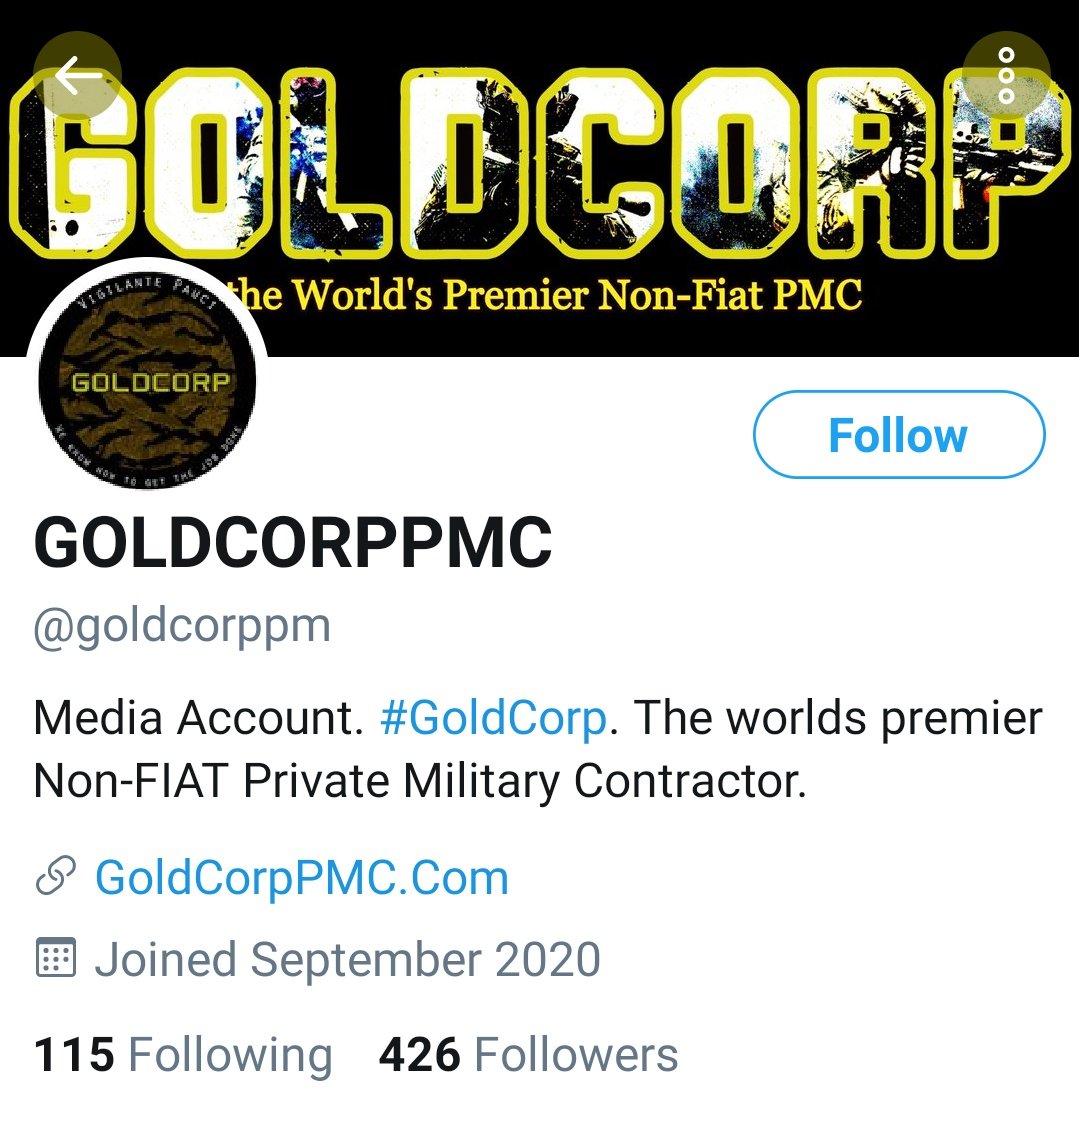 Wannabe soldier and self-described Proud Boy  @RoFonDetum, who invites us to call him a White supremacist, says he is "drooling" over the idea of working for Gold Corp, which calls itself a Private Military Contractor.